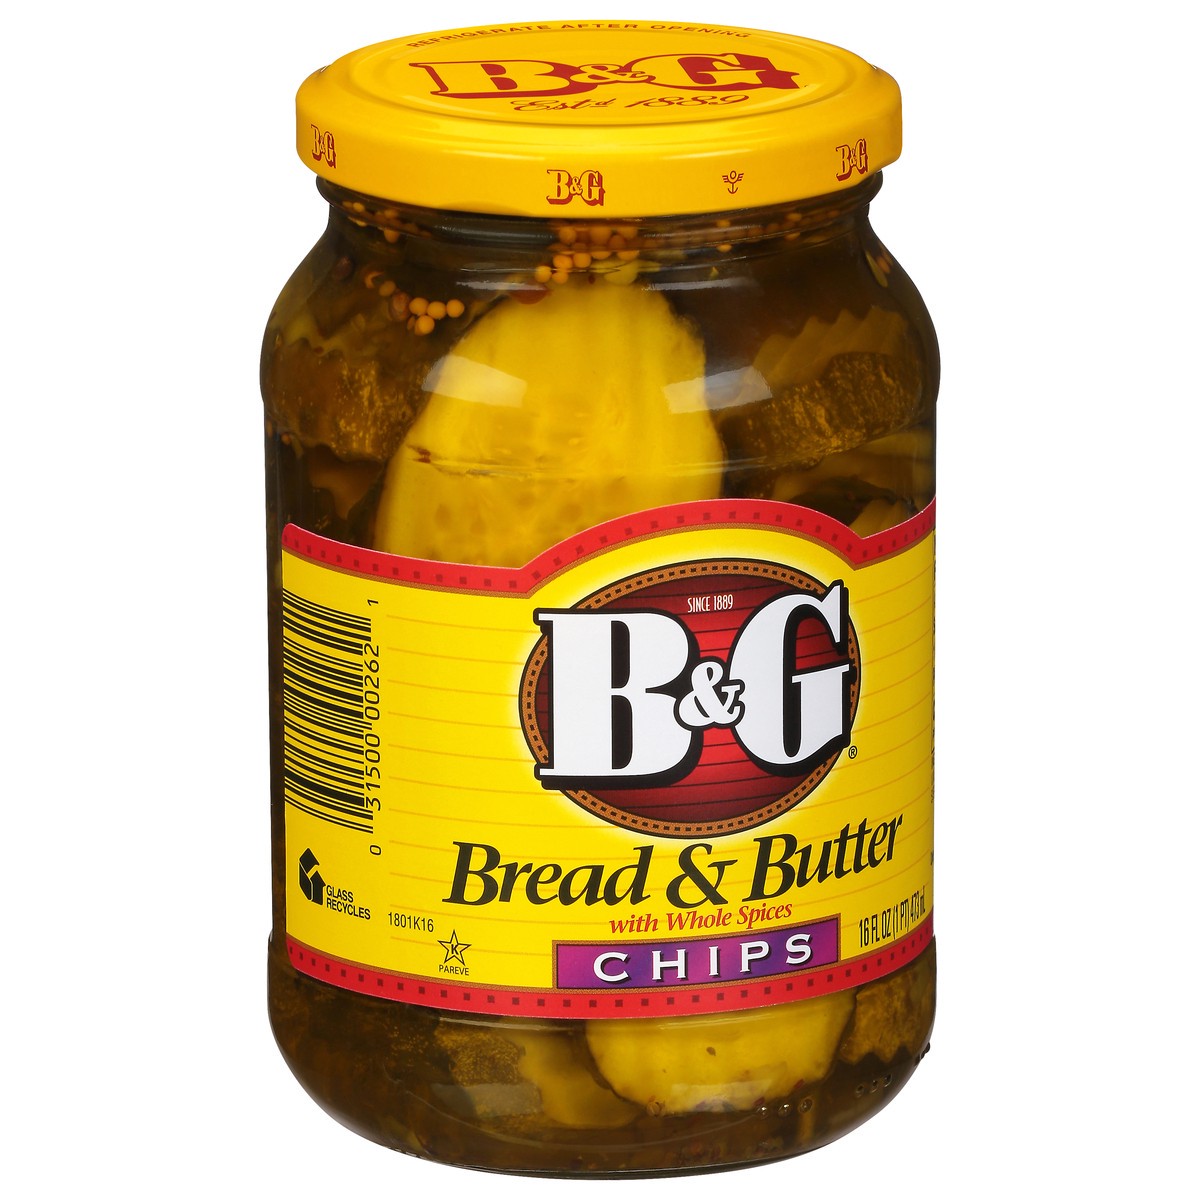 slide 2 of 10, B&G Chips Bread & Butter Pickles with Whole Spices 16 fl oz, 16 fl oz